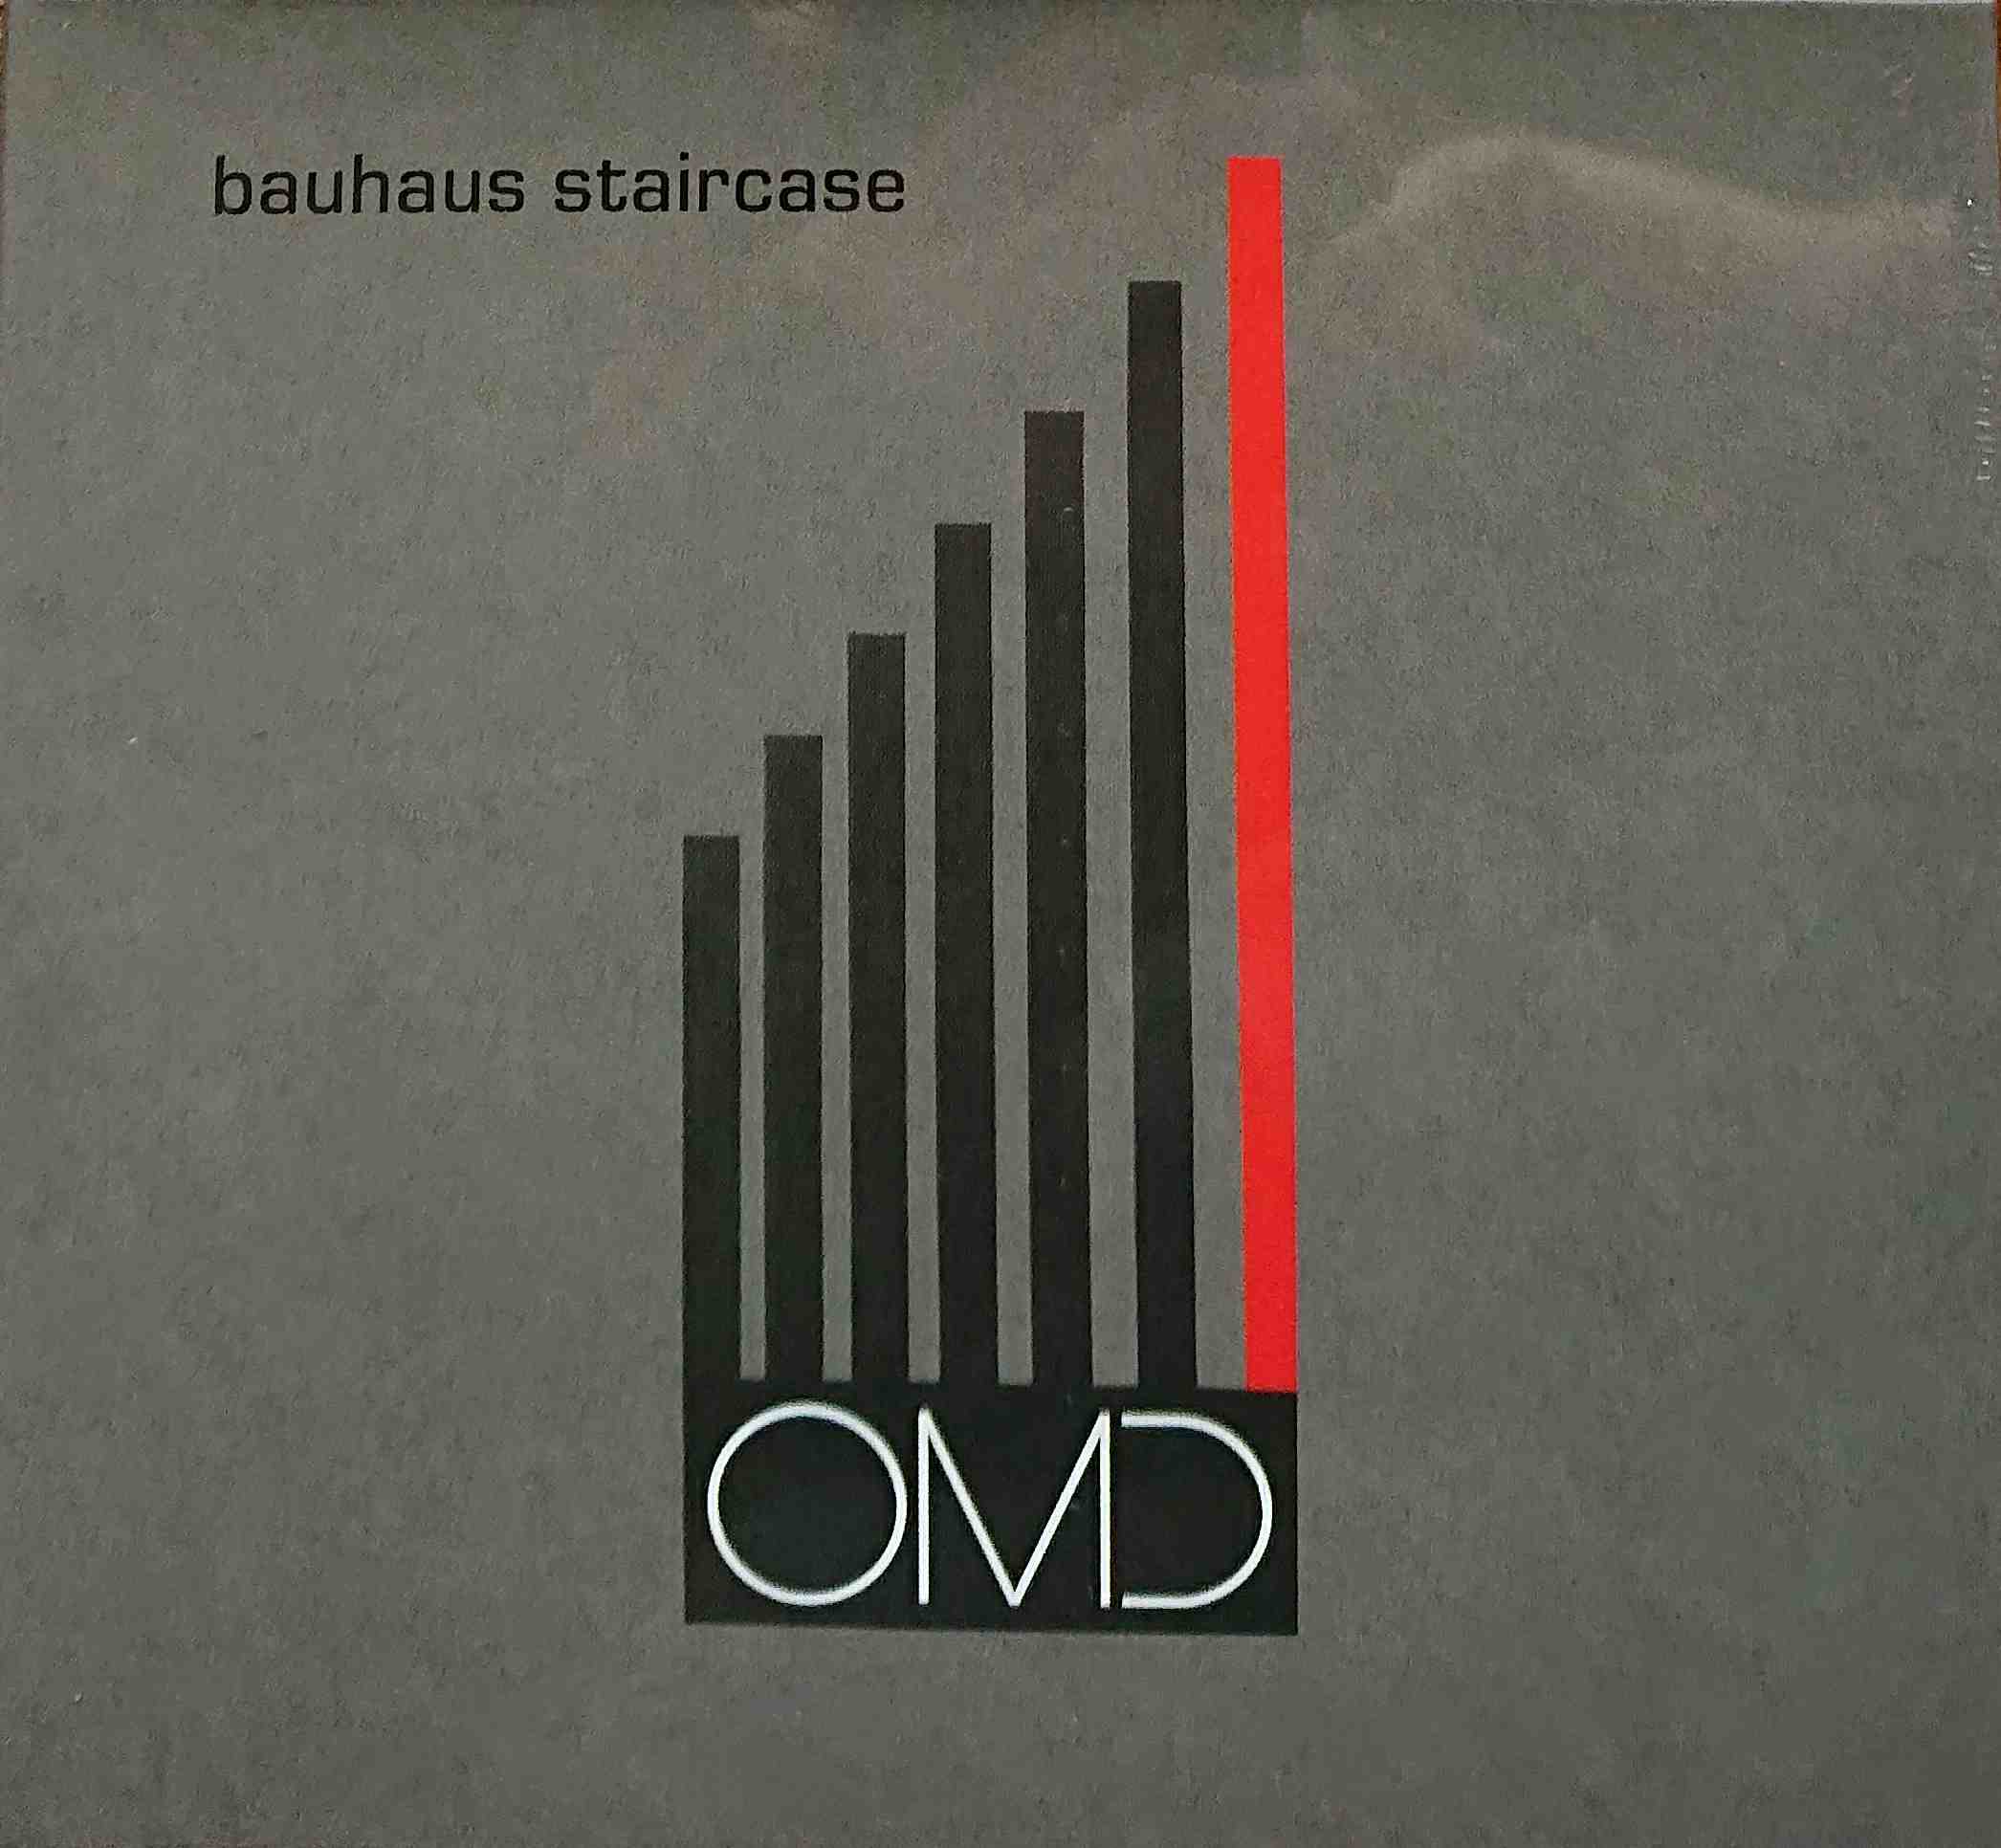 Picture of 100CD138 Bauhaus staircase by artist Orchestral Manoeuvres in the Dark (OMD) 